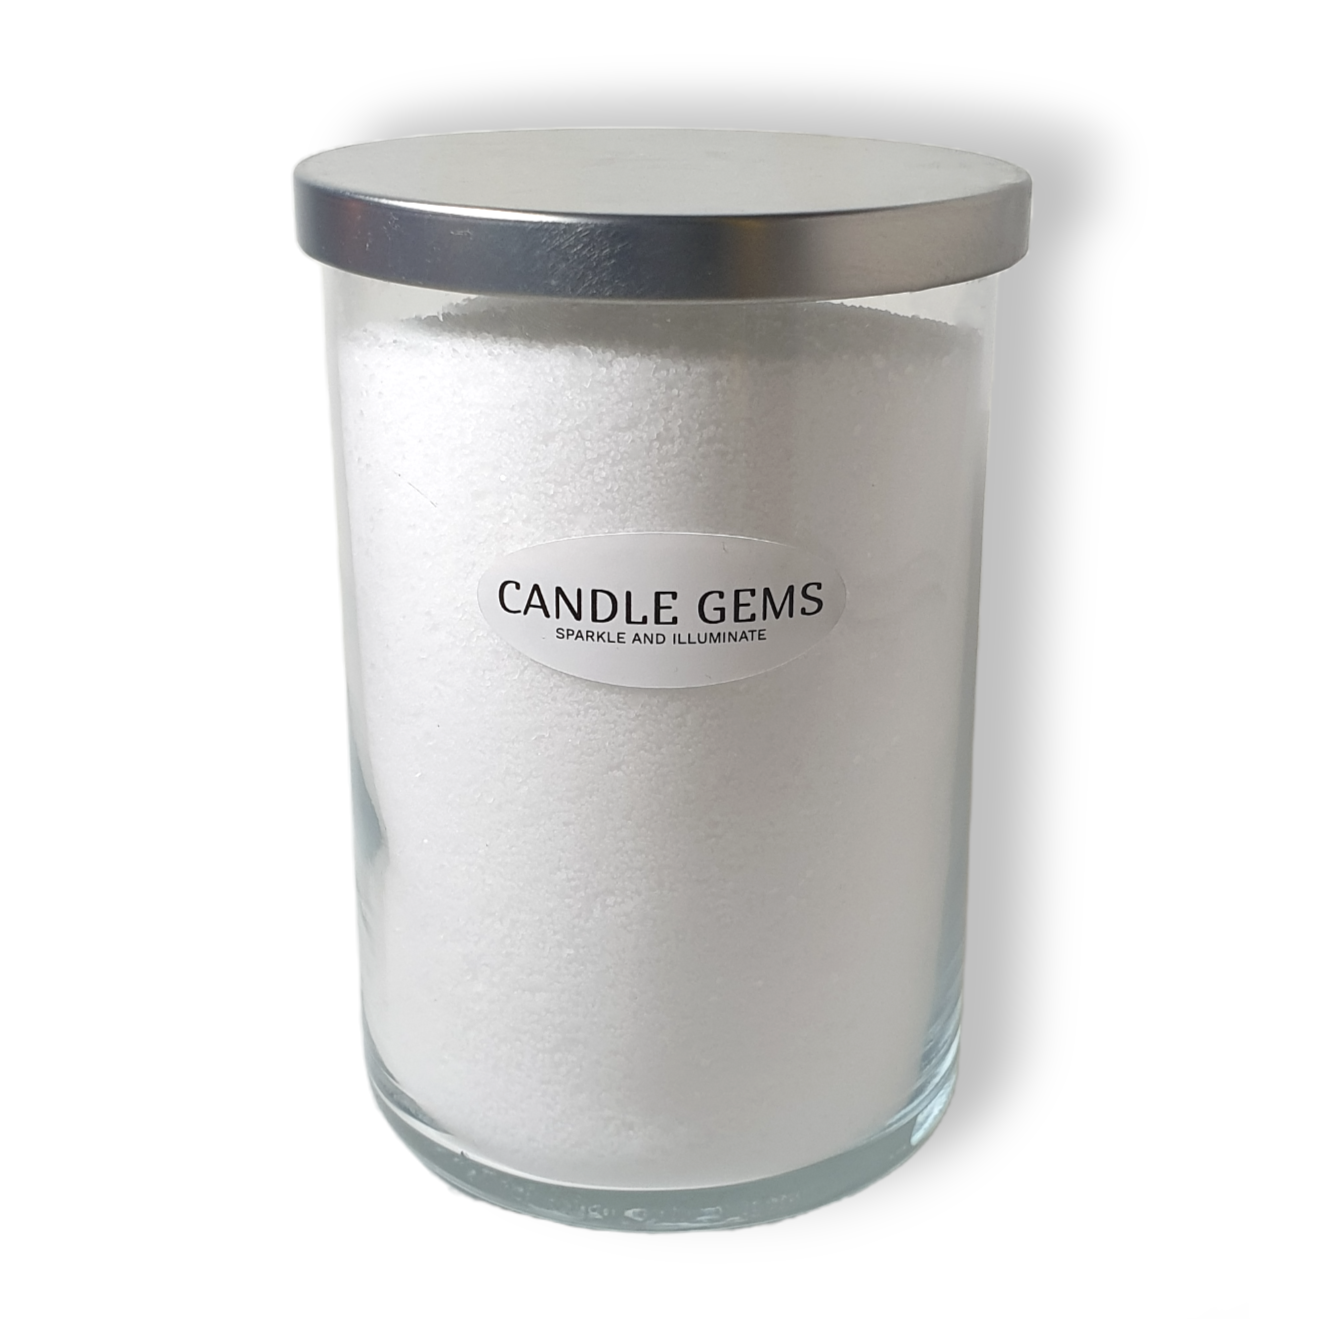 Candle Gems in glass container | White